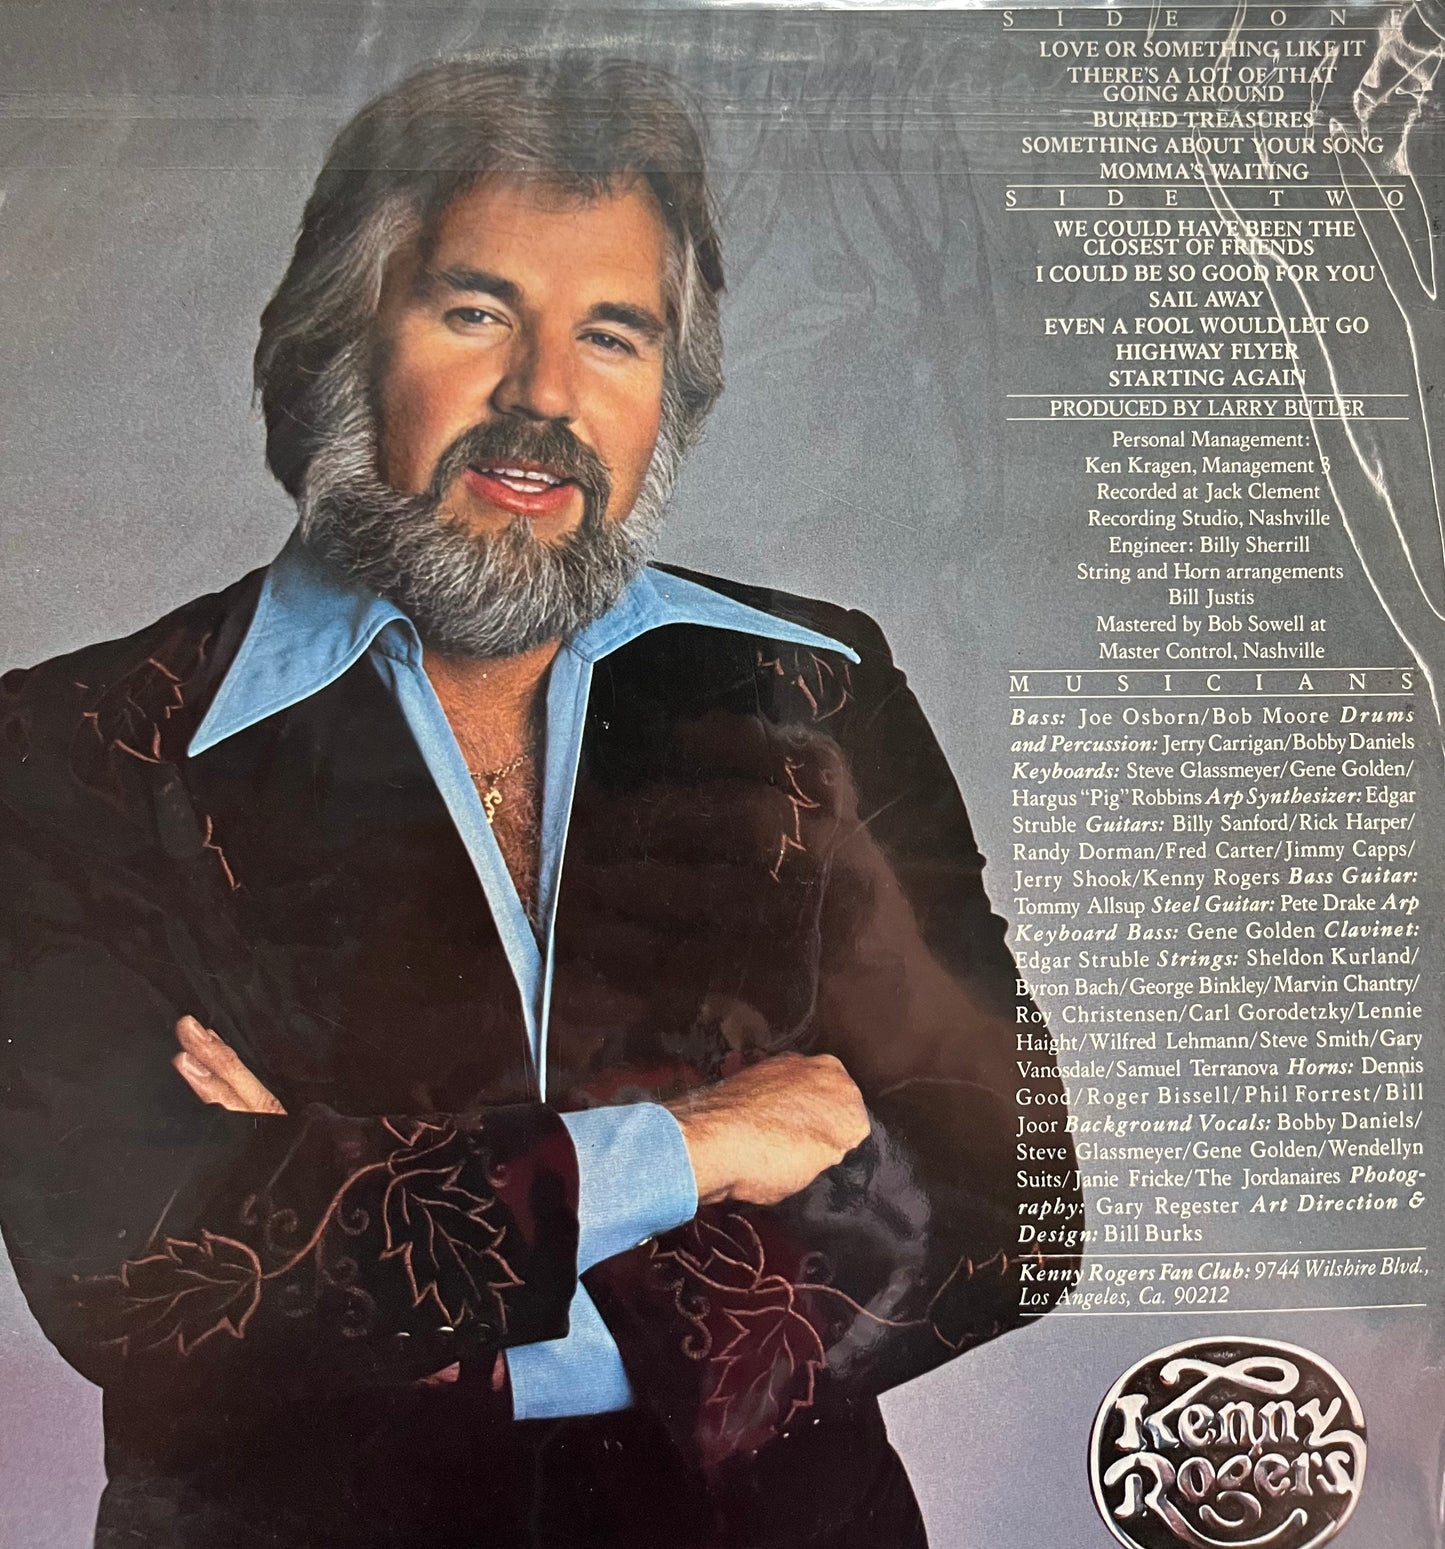 Kenny Rogers - Love Or Something Like That